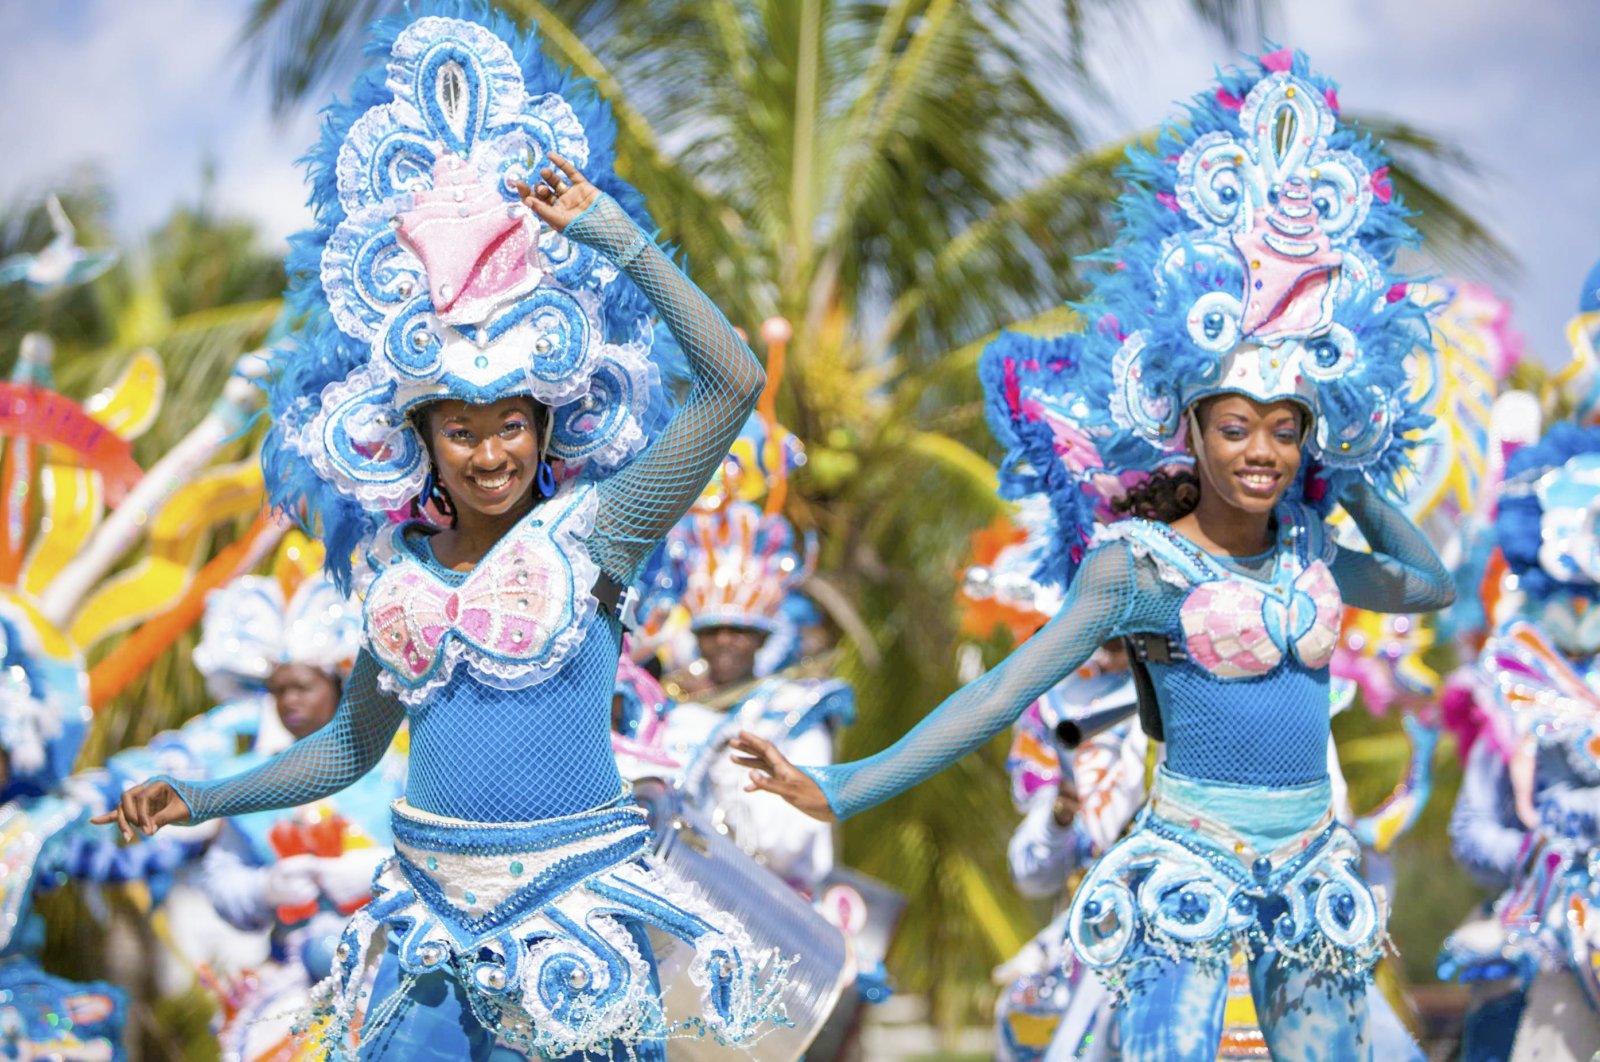 Junkanoo is celebrated in the Bahamas on Dec. 26, among other days. (DPA)